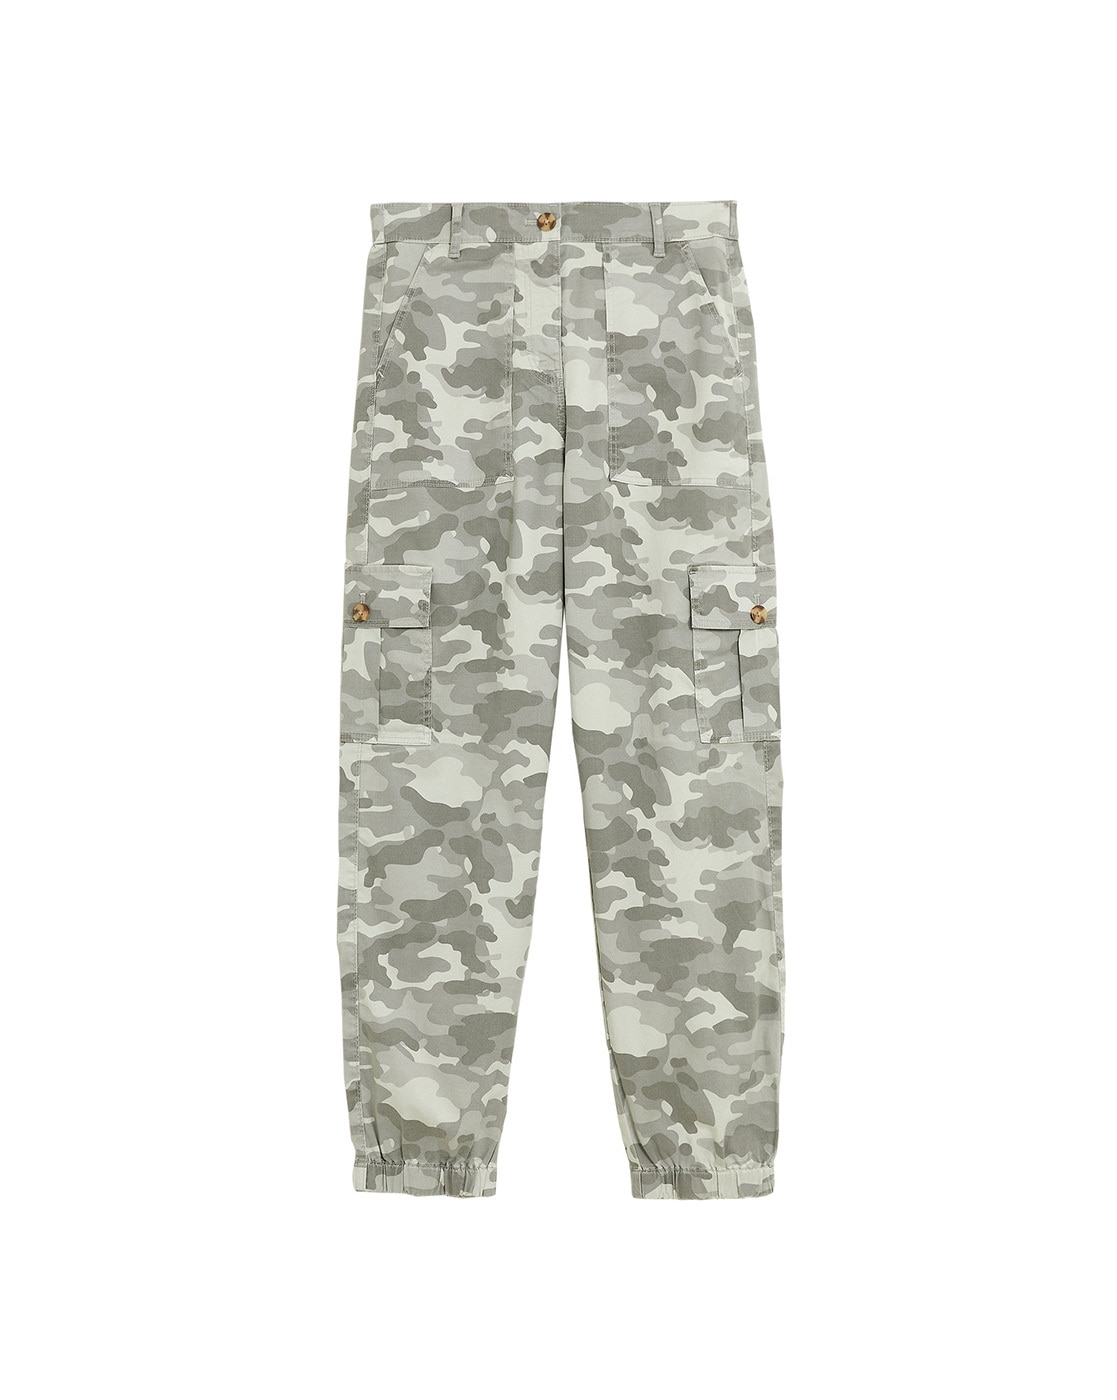 Buy Grey Trousers  Pants for Women by Marks  Spencer Online  Ajiocom